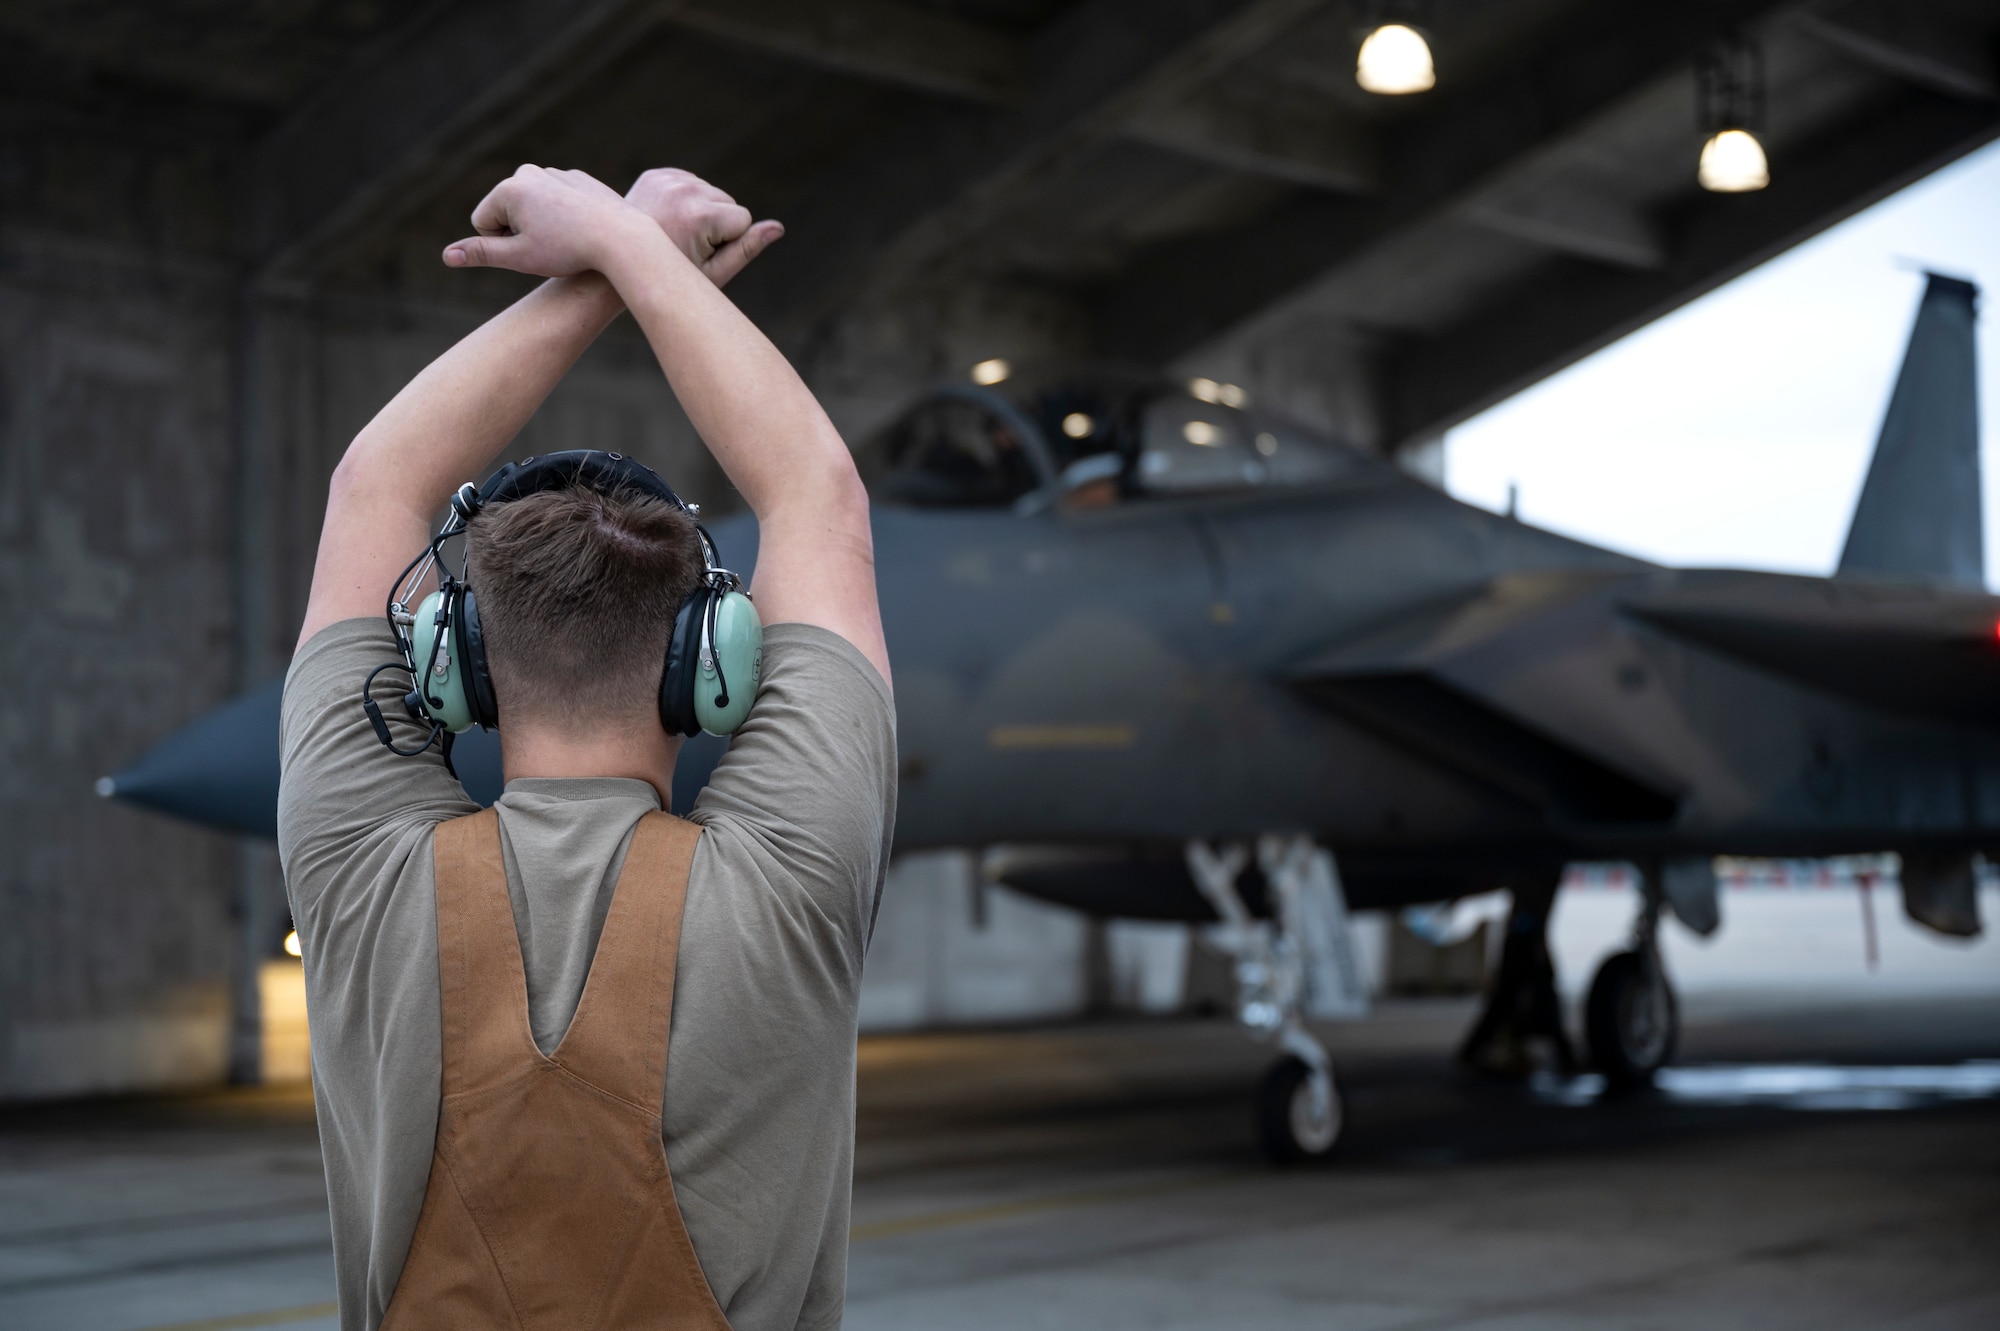 A U.S. Air Force crew chief assigned to the 44th Aircraft Maintenance Unit prepares to marshal an F-15C Eagle onto the taxiway at Kadena Air Base, Japan, Dec. 1, 2022. As a part of its modernization plan, the 18th Wing is retiring its aging fleet of F-15C/D Eagles that have been in service for more than four decades. (U.S. Air Force photo by Senior Airman Jessi Roth)